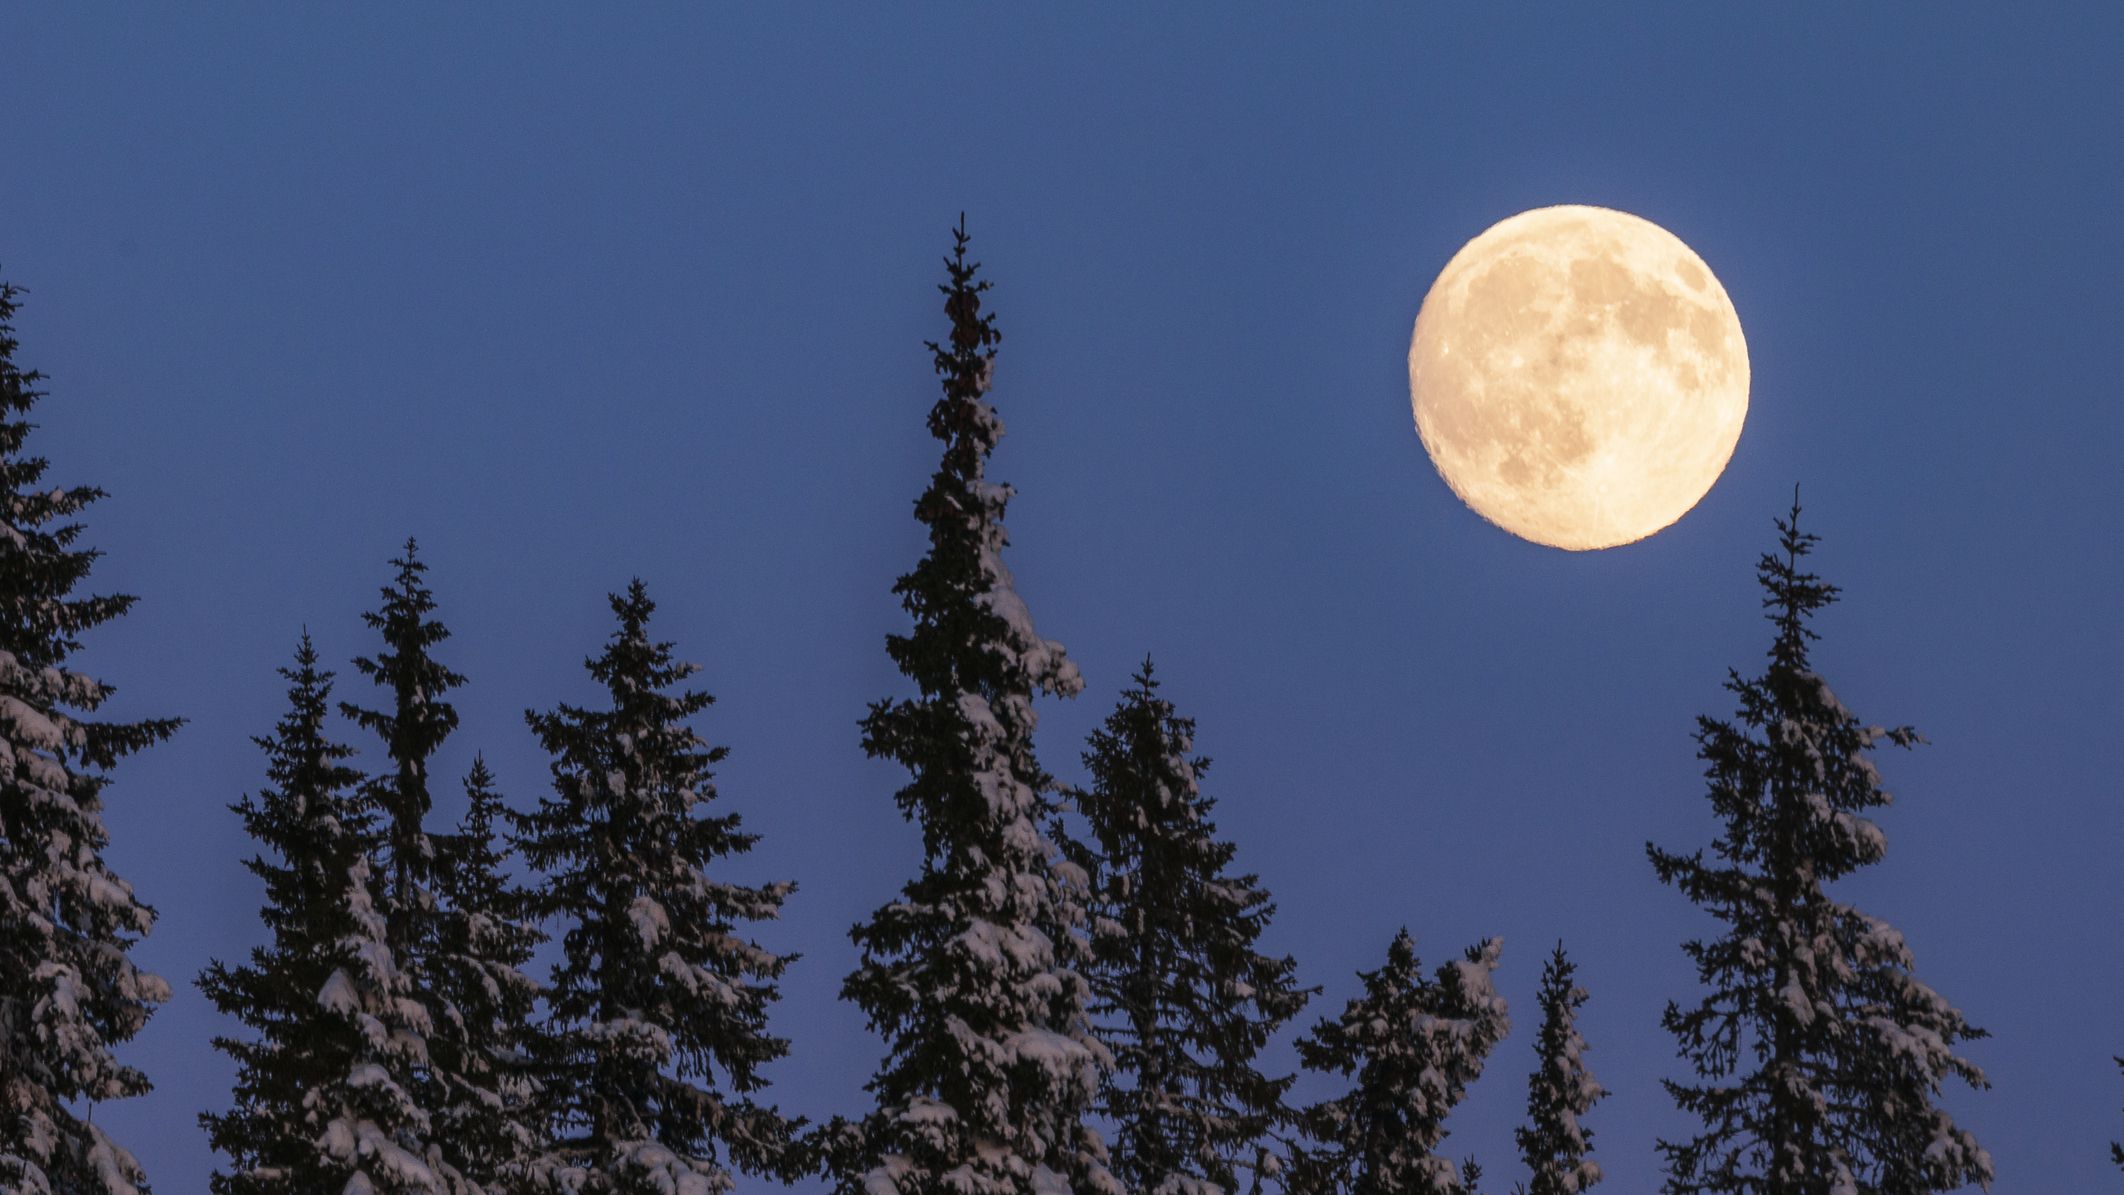 Winter solstice 'long night moon': Get ready for year's last full moon